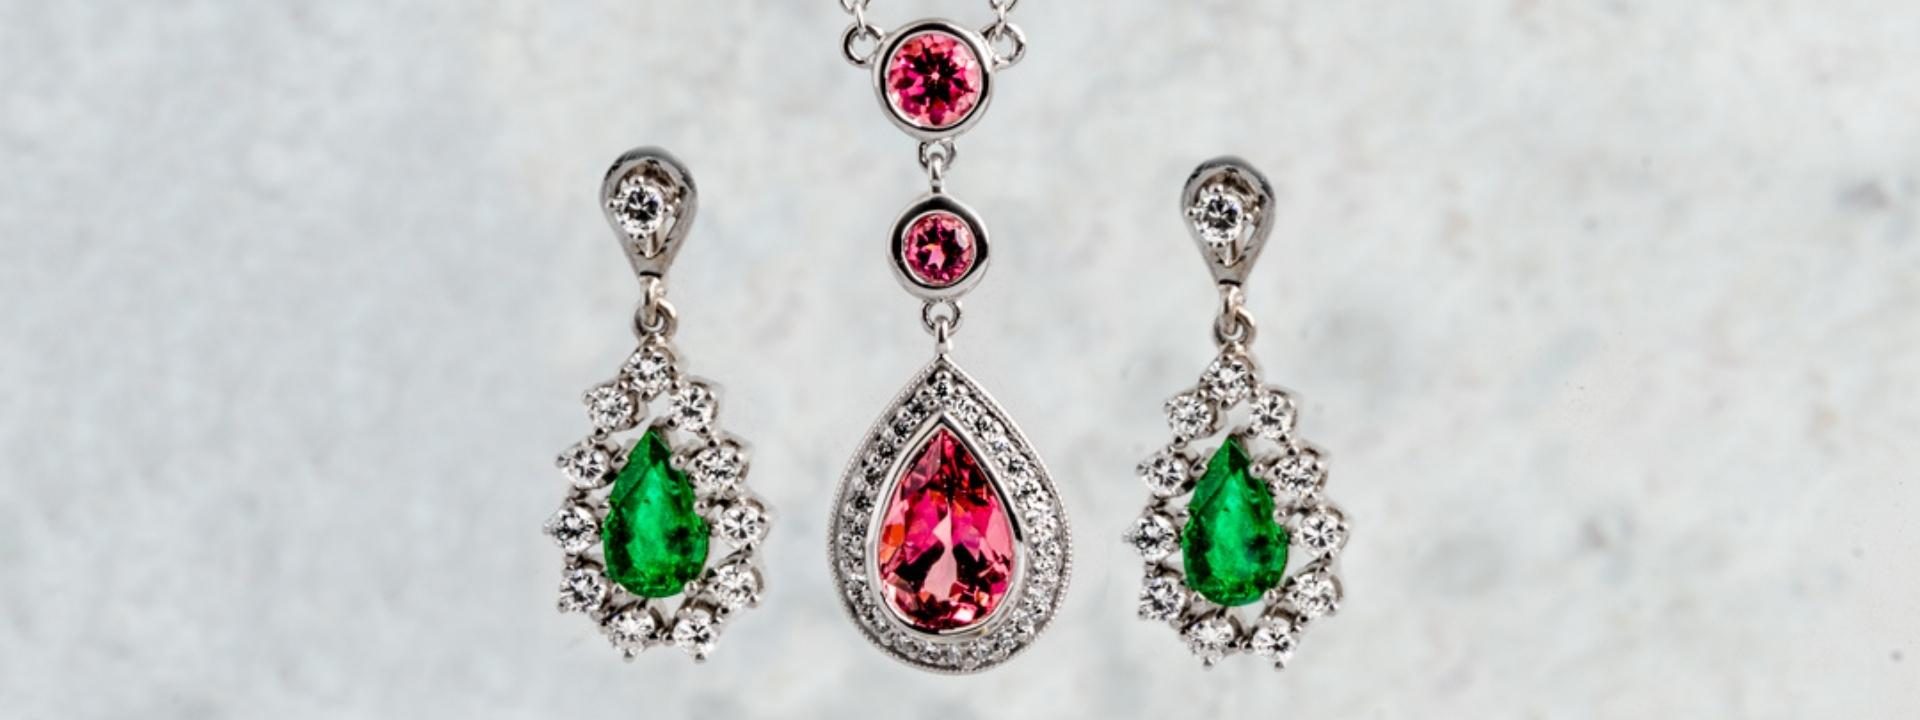 White gold pear cut drop earrings and necklace both set with gemstones surrounded by diamond haloes.